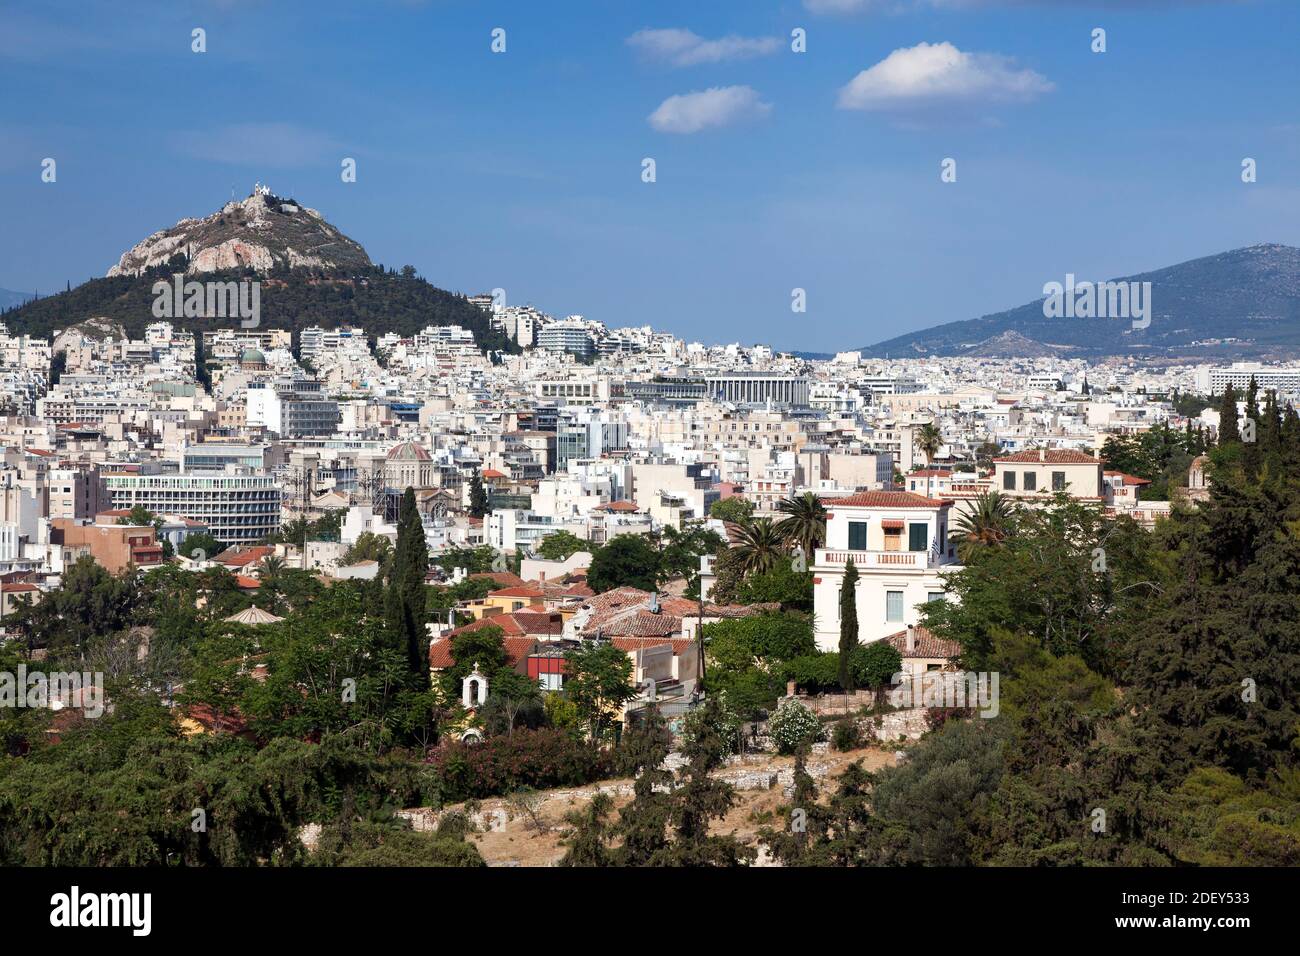 View of Mount Lycabettus from Acropolis, Athens, Greece Stock Photo